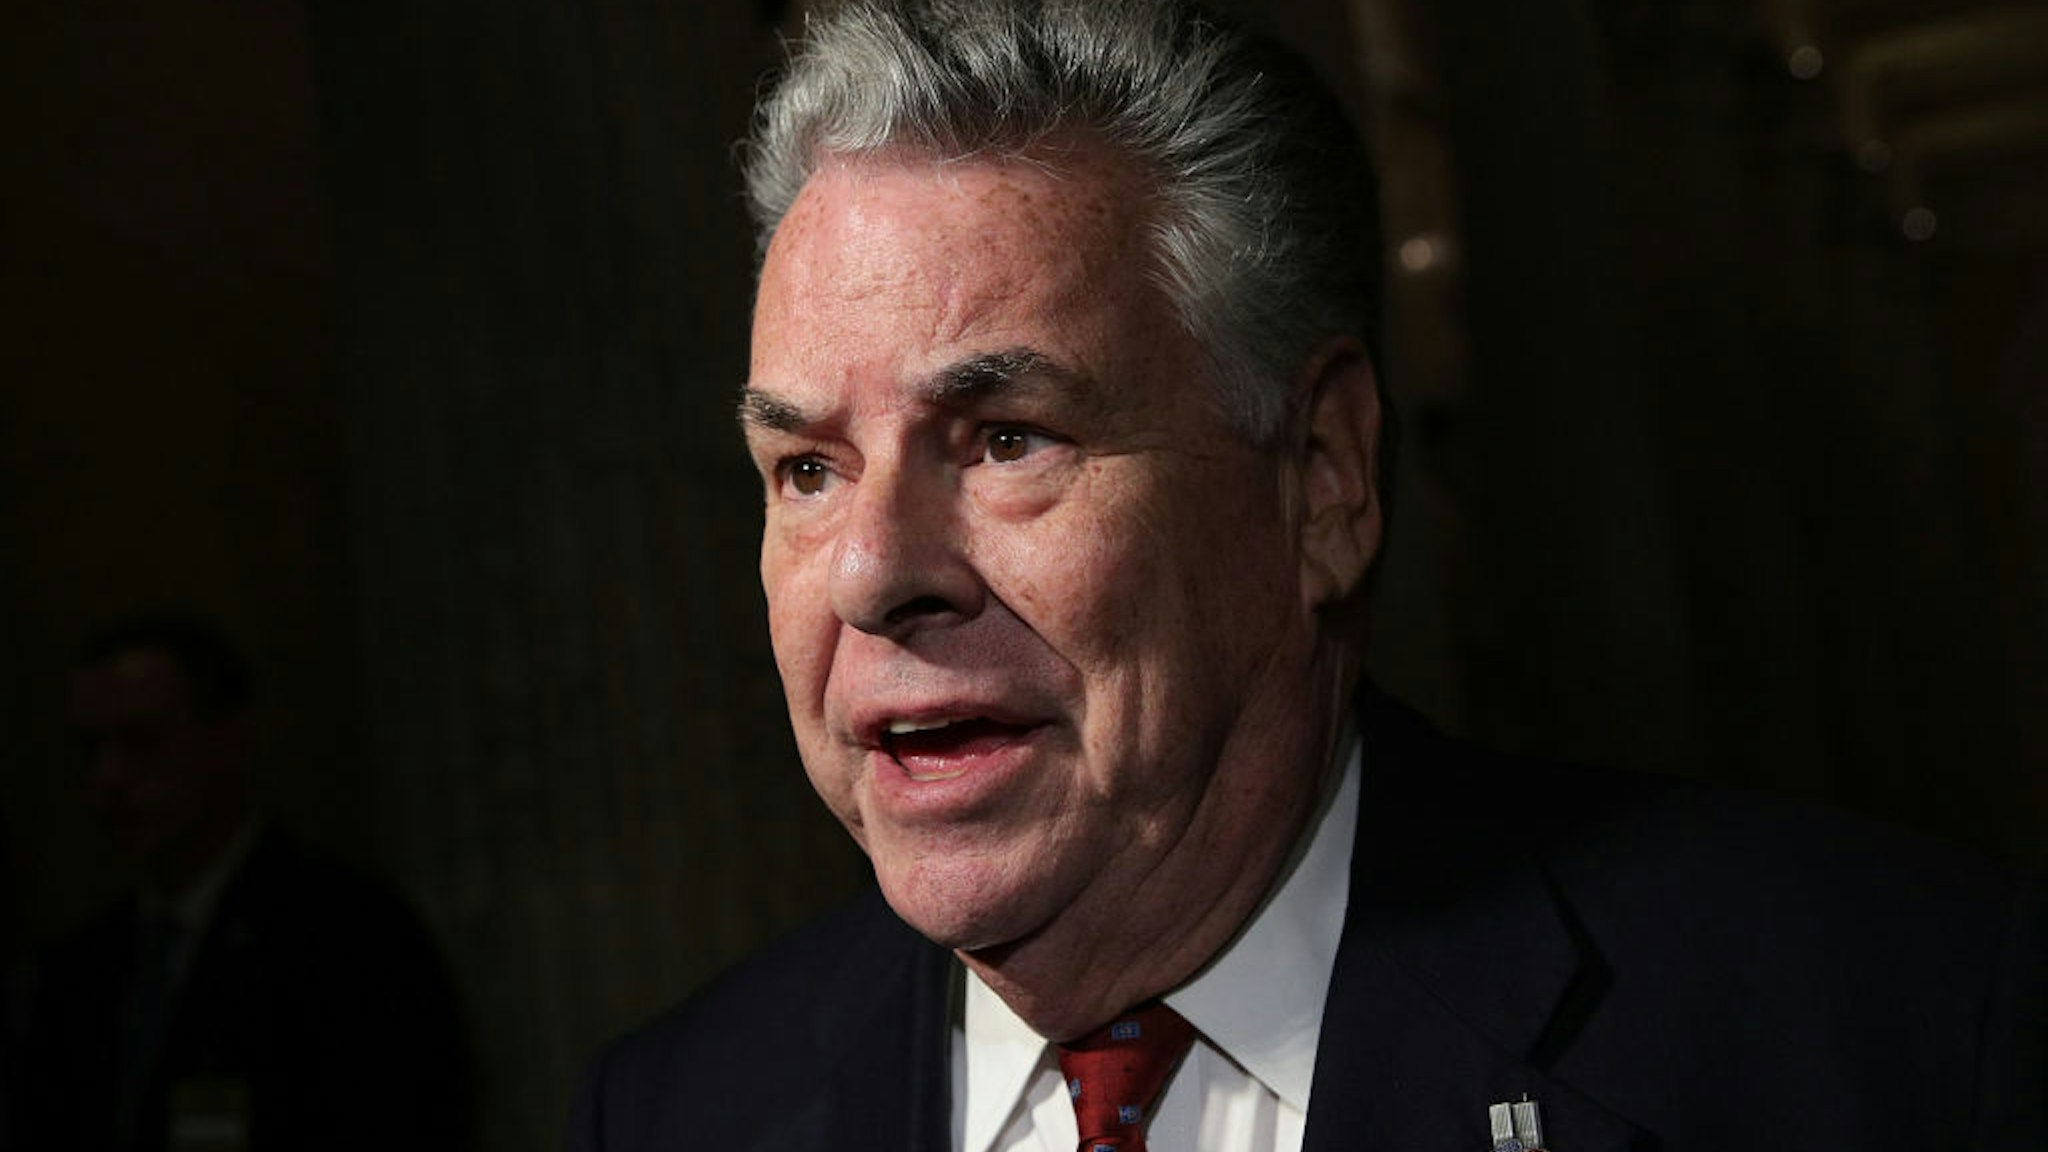 Peter King speaks to members of the media after President Donald Trump's visit to a House Republican Conference